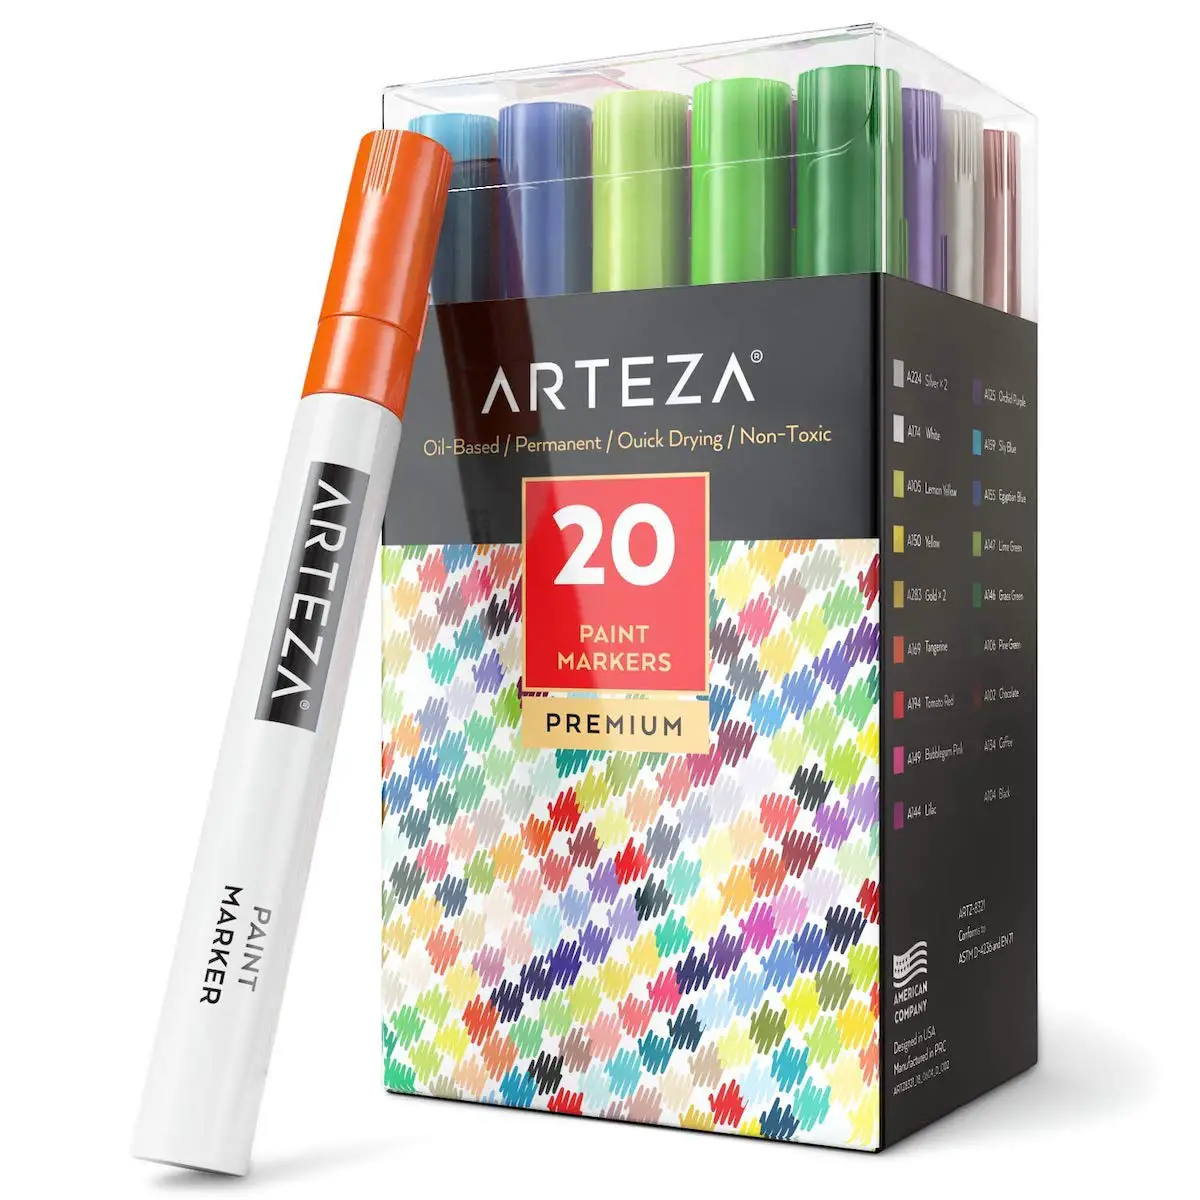 Is the Arteza Metallic Acrylic Paint Worth the Hype? Art Supply Review